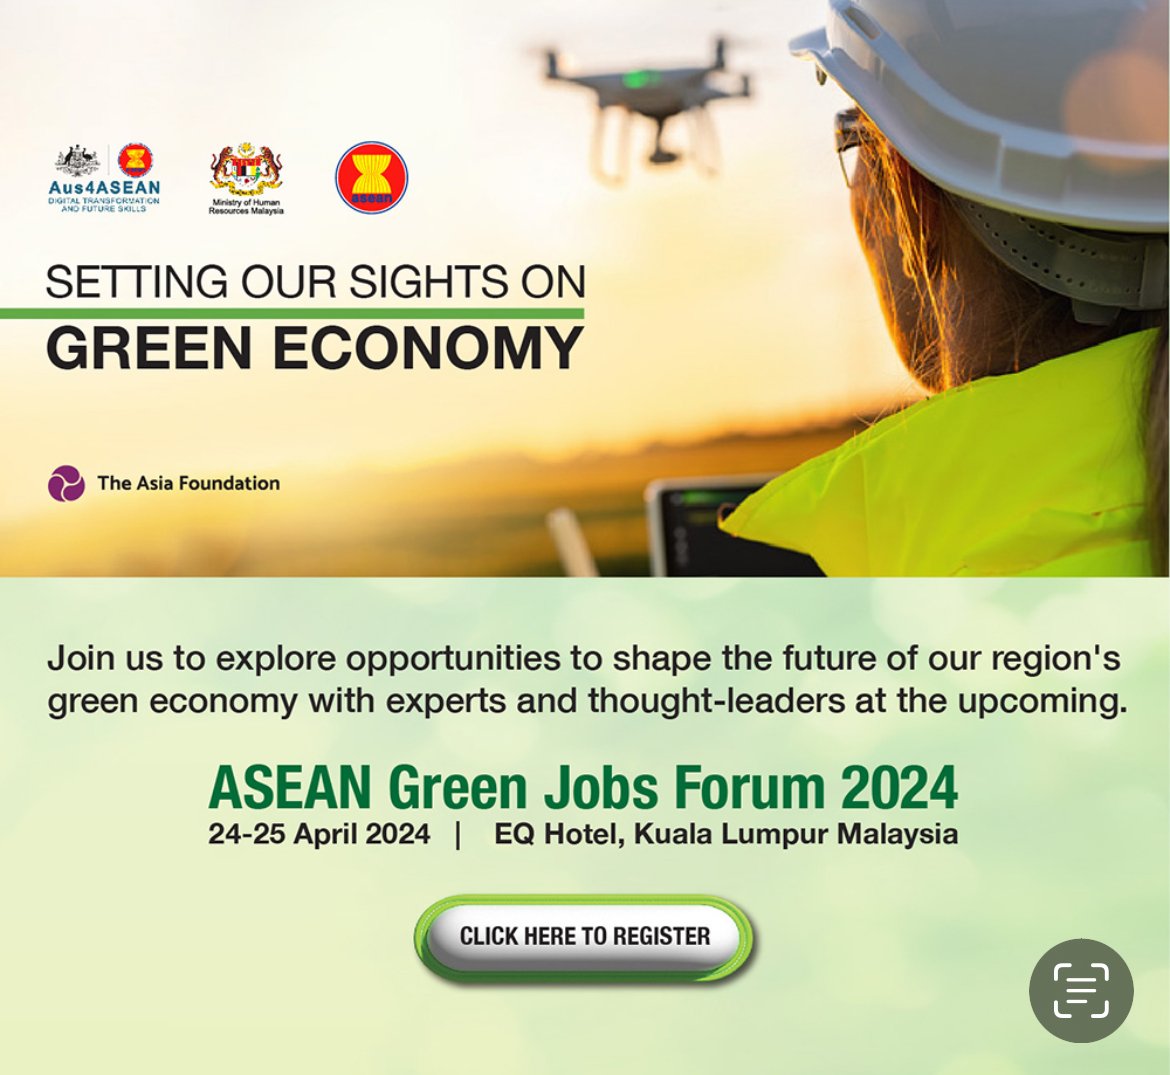 🇦🇺’s 🟢 tech, expertise, supply chains & investment can support implementation of the @ASEAN Strategy for Carbon Neutrality. Excited to join the ASEAN Green Jobs Forum as we unpack the opportunities & challenges of building green, tech enabled workforces greenjobsforum2024.com/register